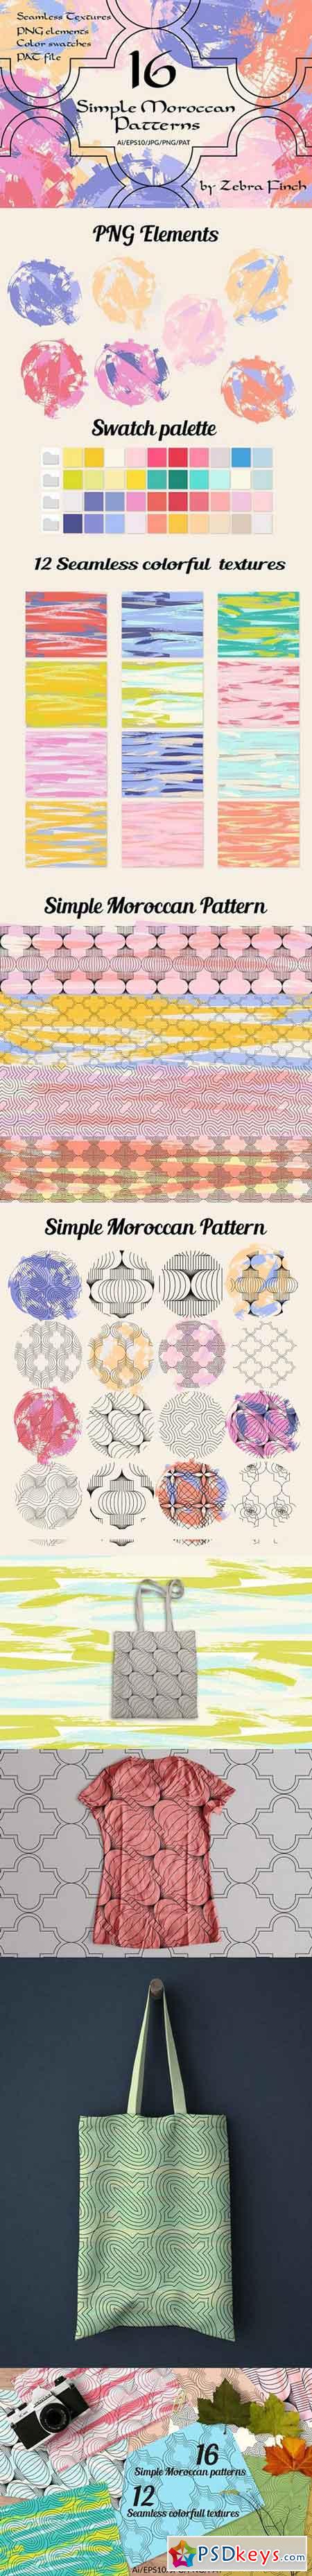 Simple Moroccan patterns+textures 1227798